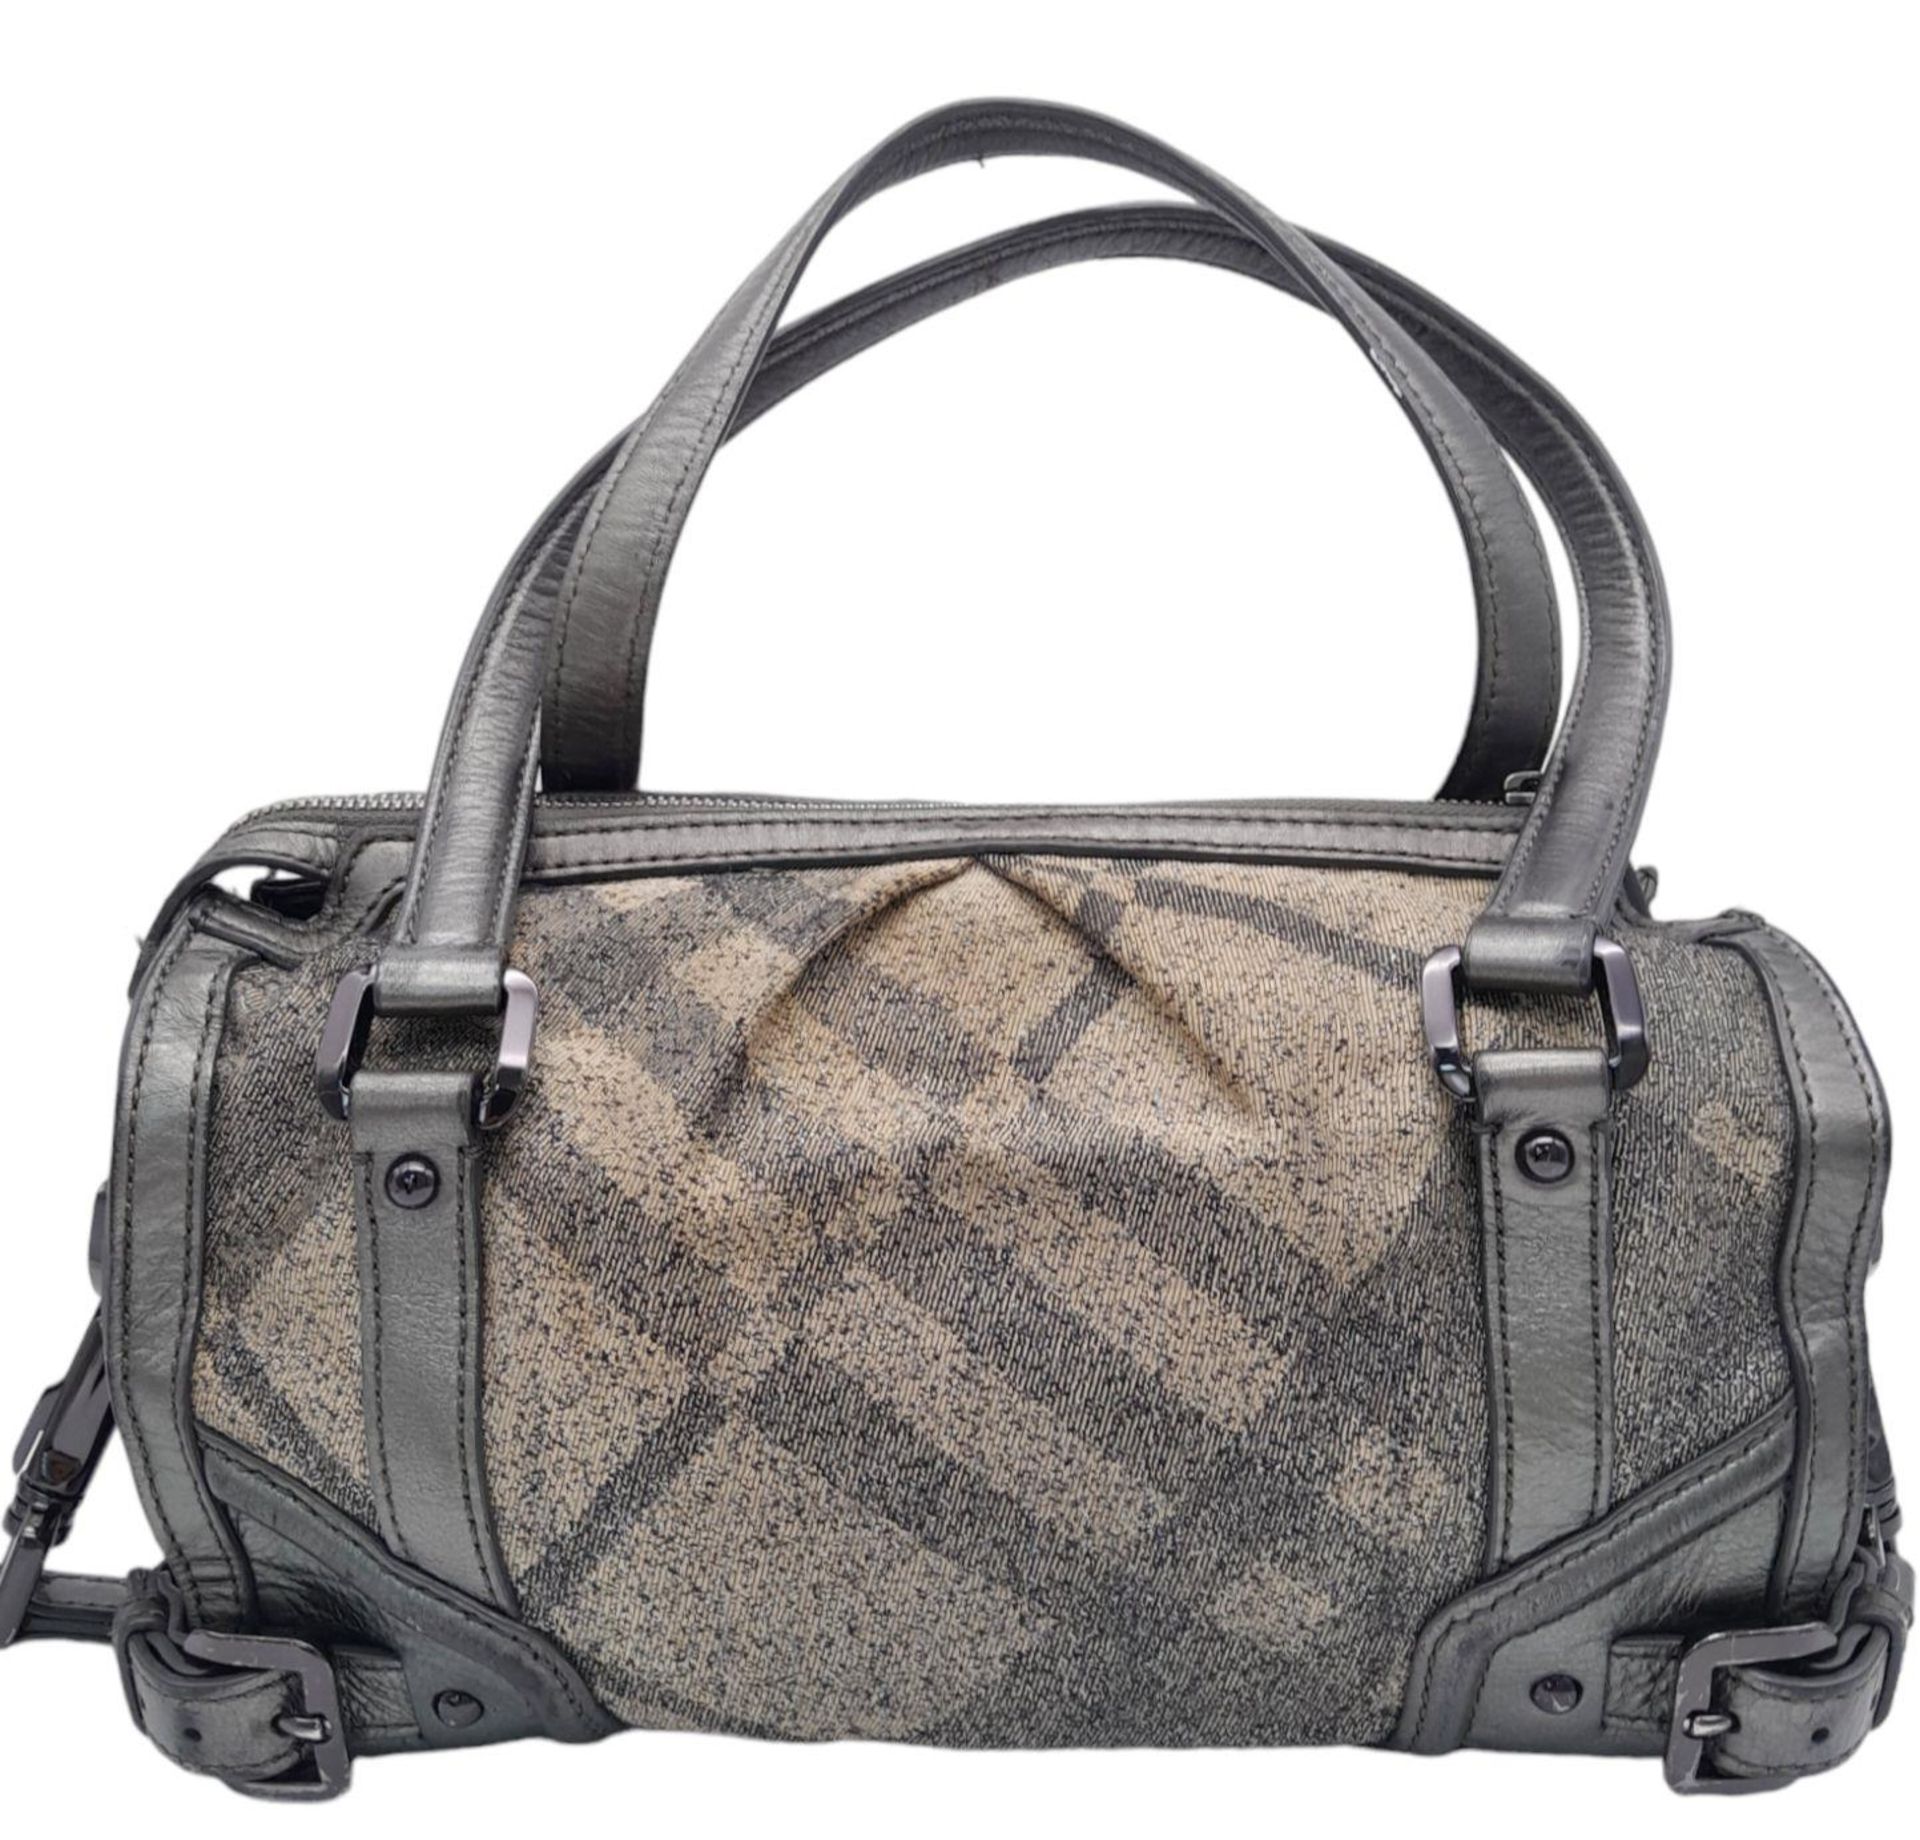 A Burberry Metallic Grey Smoke Check Bag. Canvas exterior with leather trim, leather straps, black- - Image 2 of 9